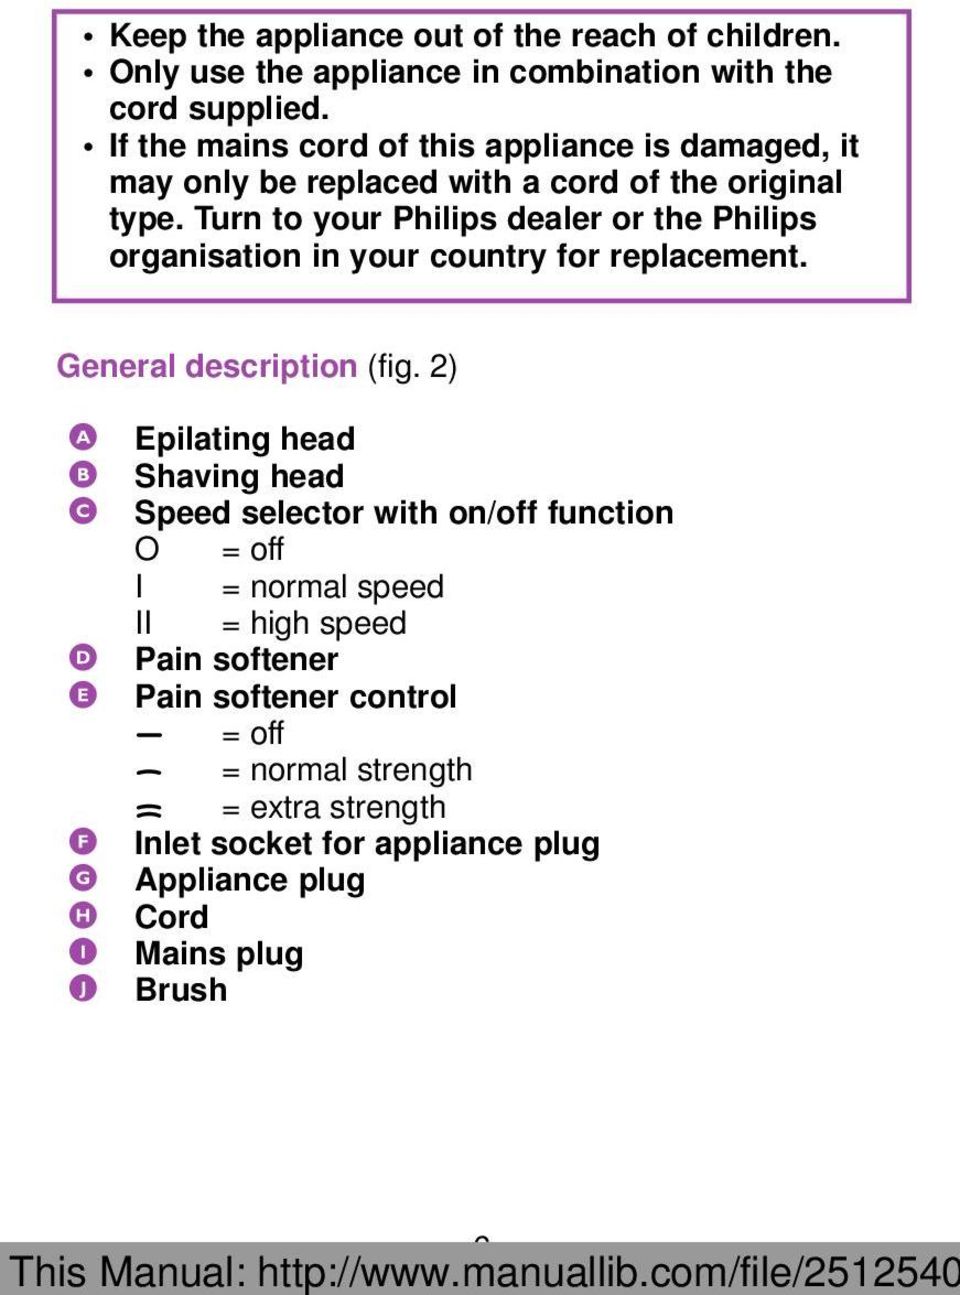 Turn to your Philips dealer or the Philips organisation in your country for replacement. General description (fig.